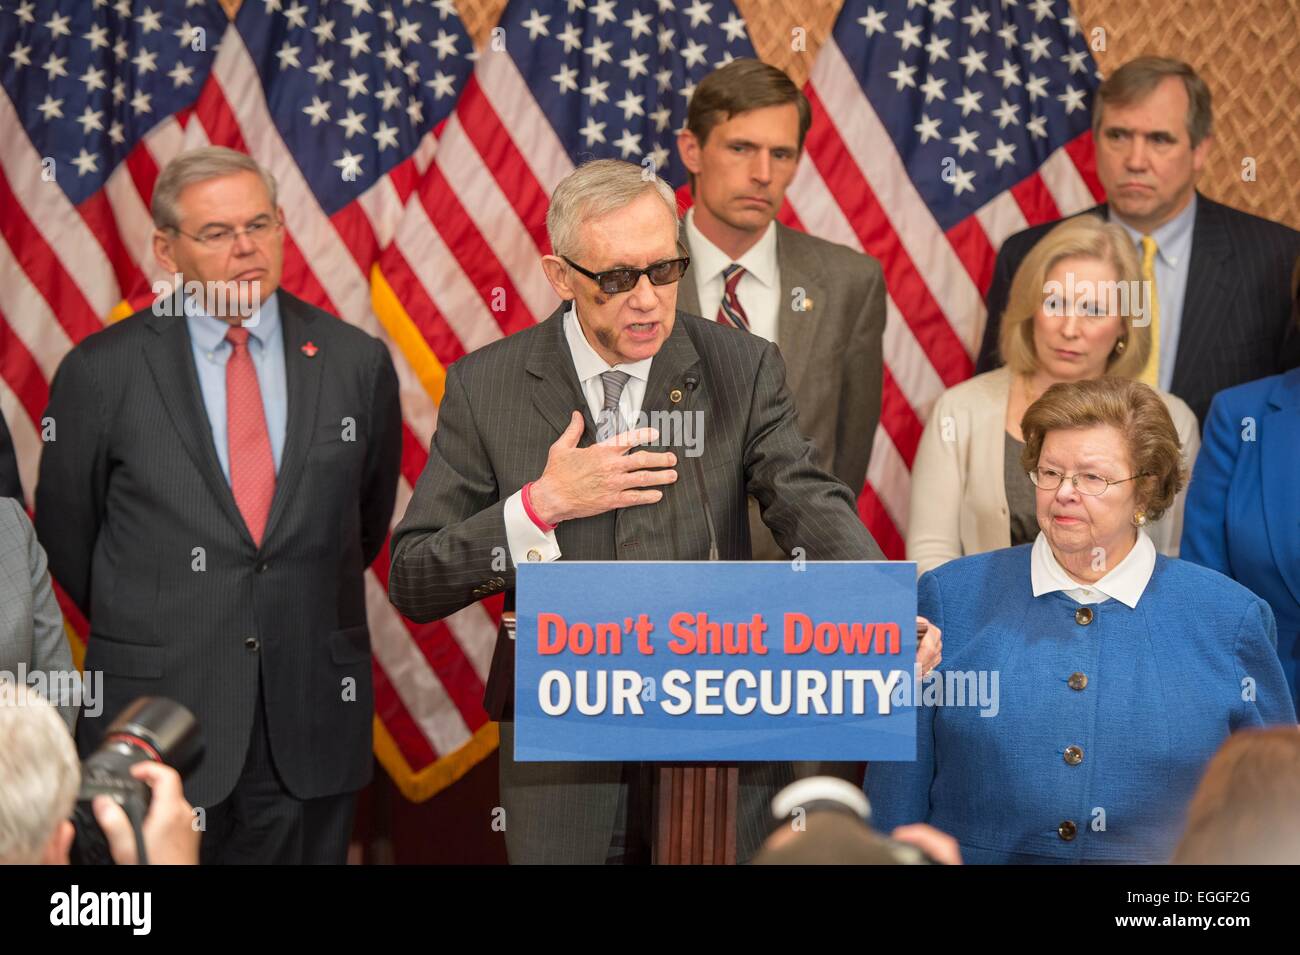 US Senate Minority Leader Senator Harry Reid joins other Senators to call for passing funding for Homeland Security blocked by Republicans over immigration issues during a press conference on Capitol Hill  February 24, 2015 in Washington, DC. Stock Photo